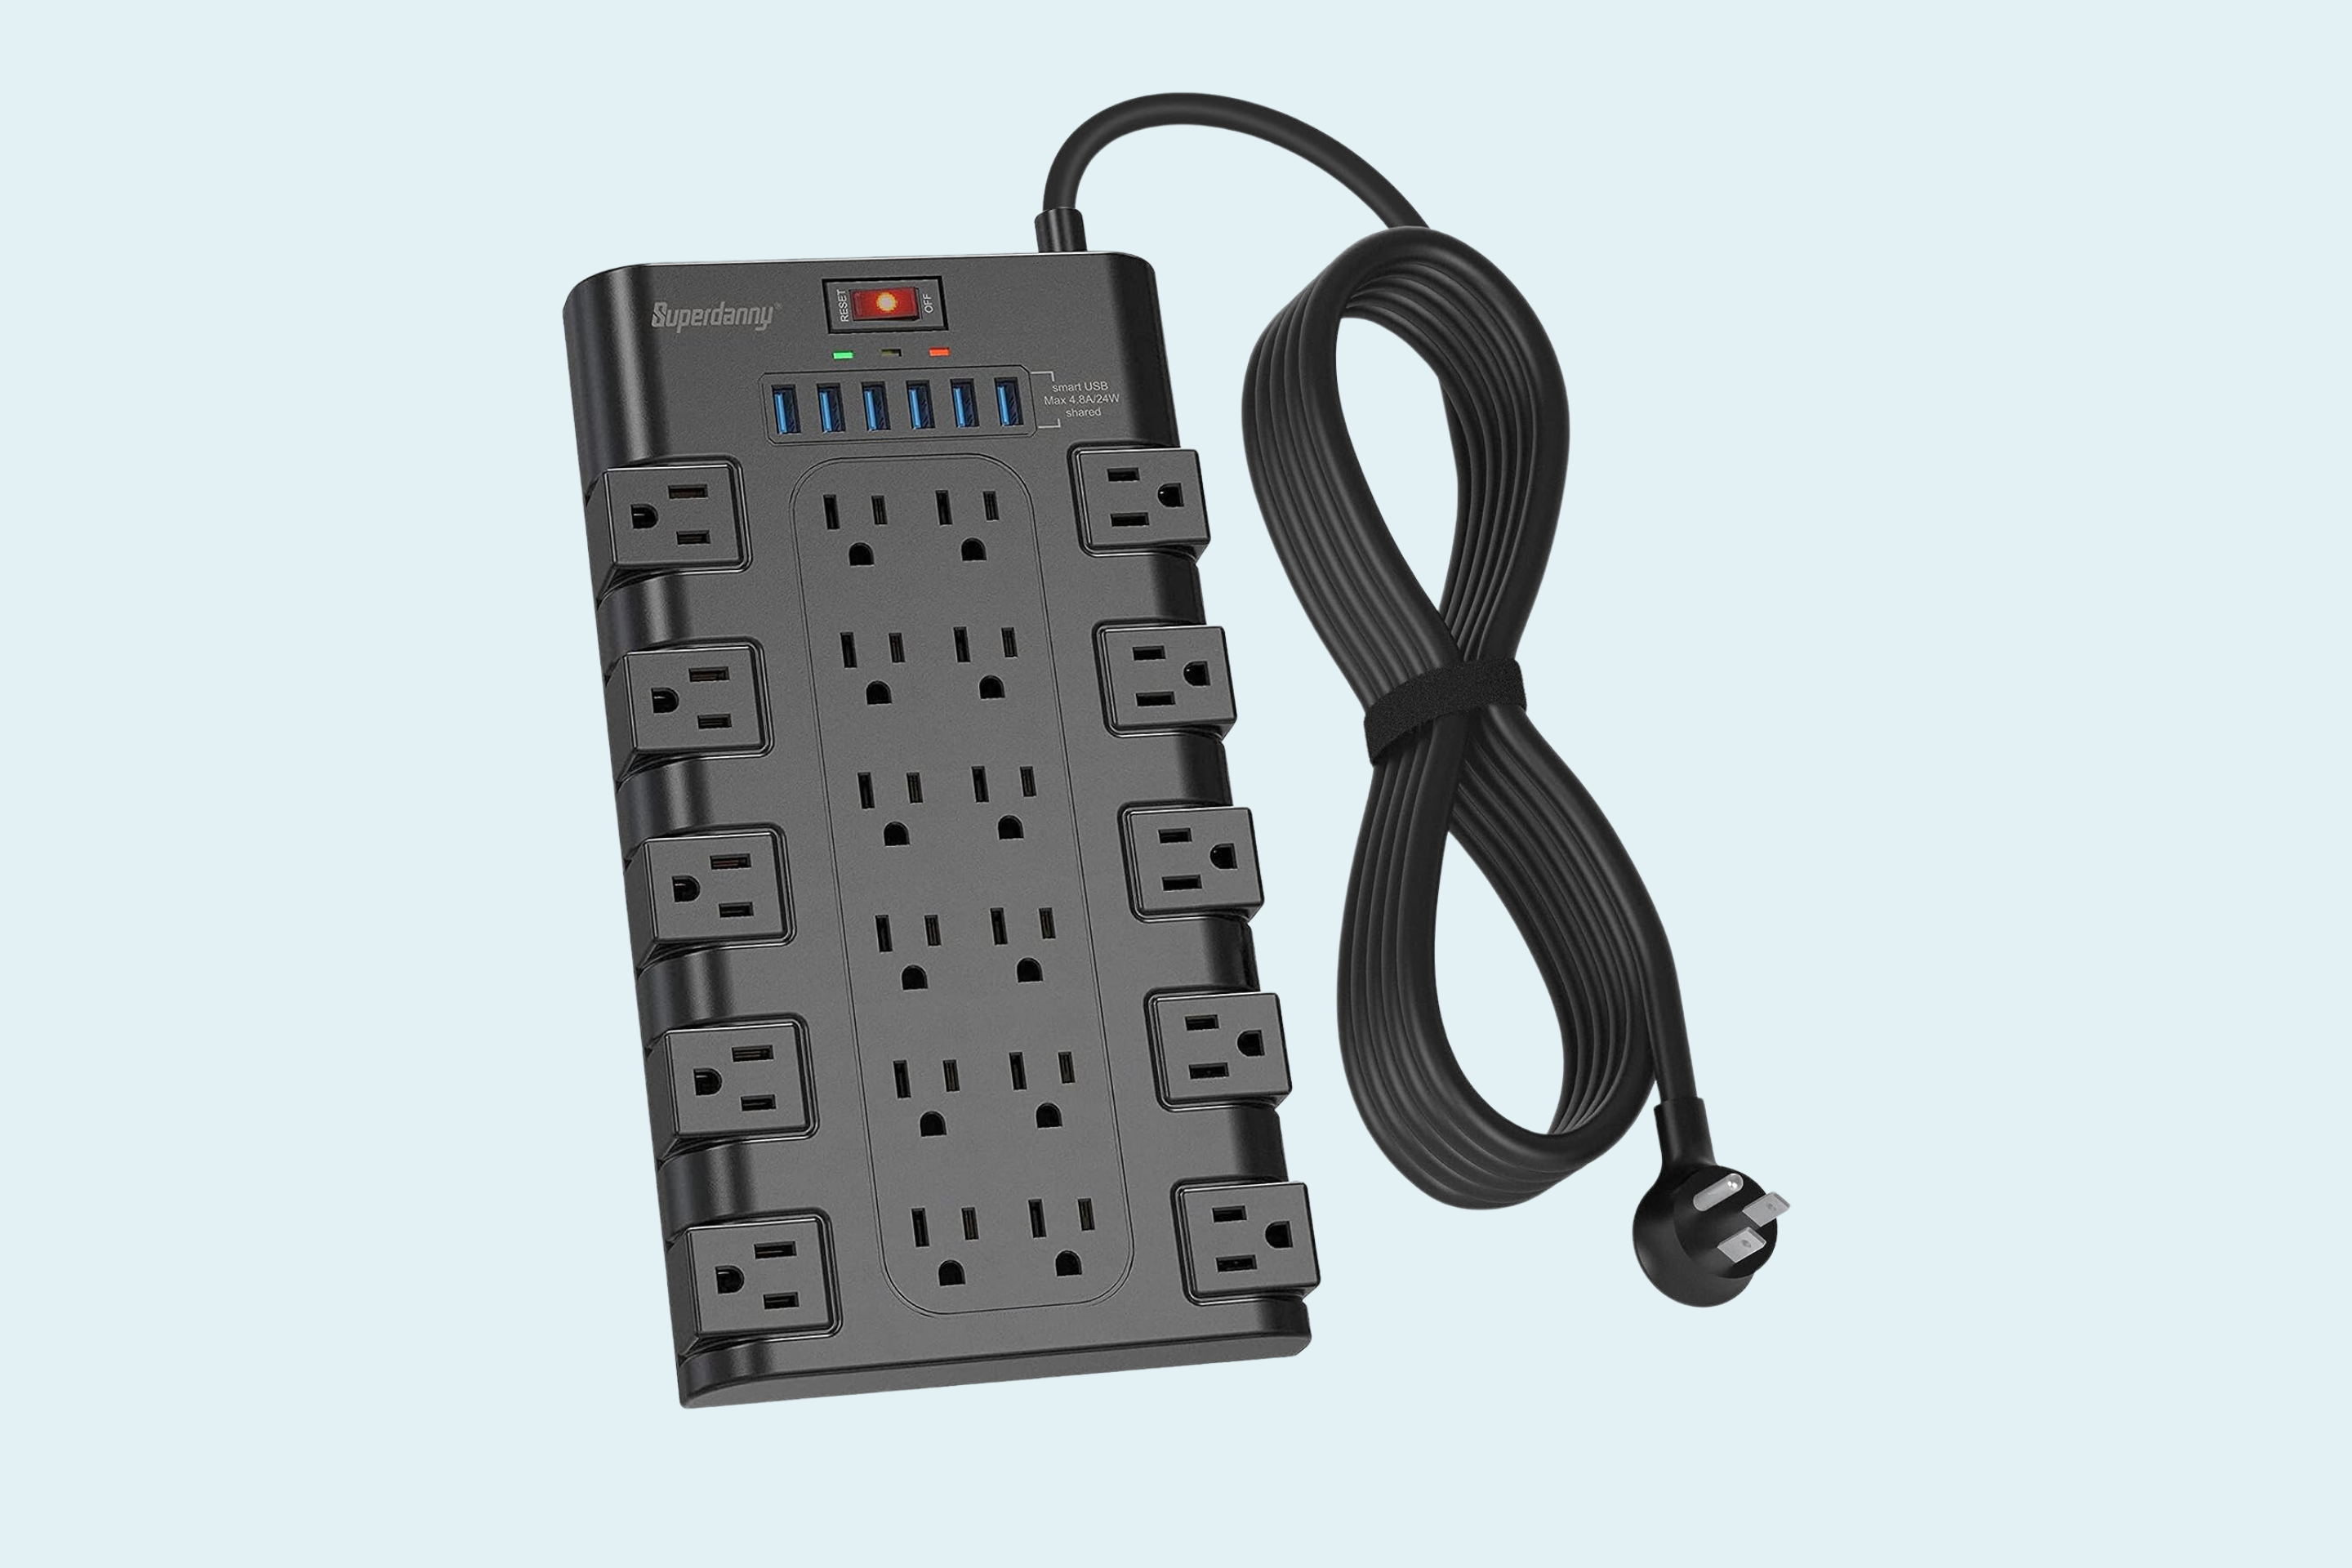 superdanny surge protector power strip review